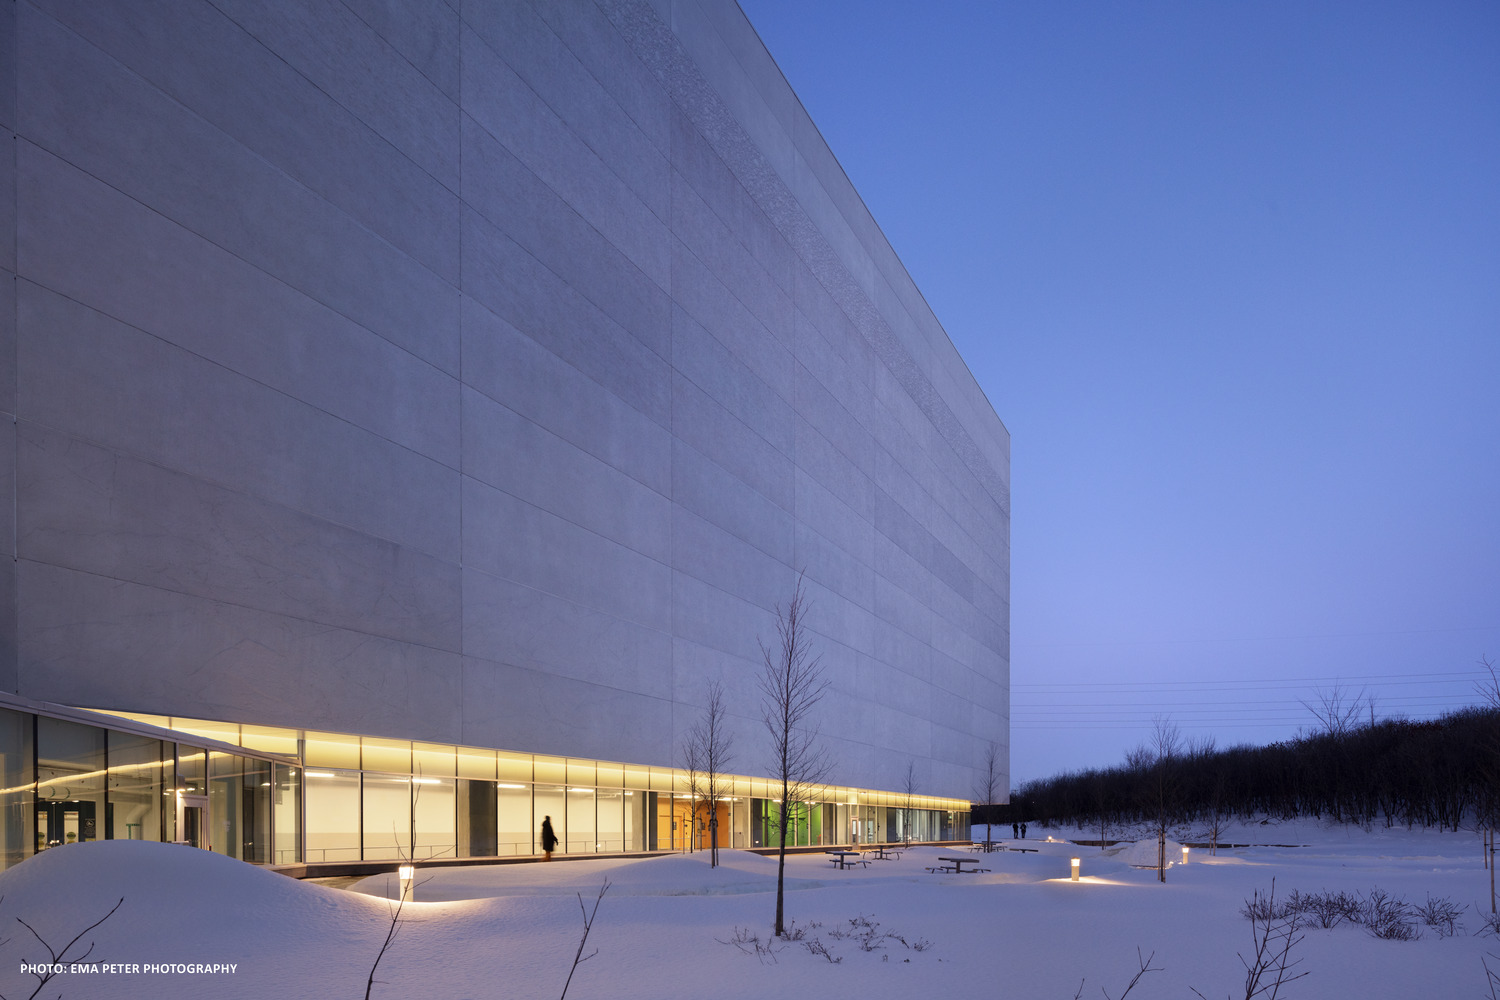 Modern building with large, illuminated windows at dusk, surrounded by snow-covered ground with a clear blue sky and a few bare trees.